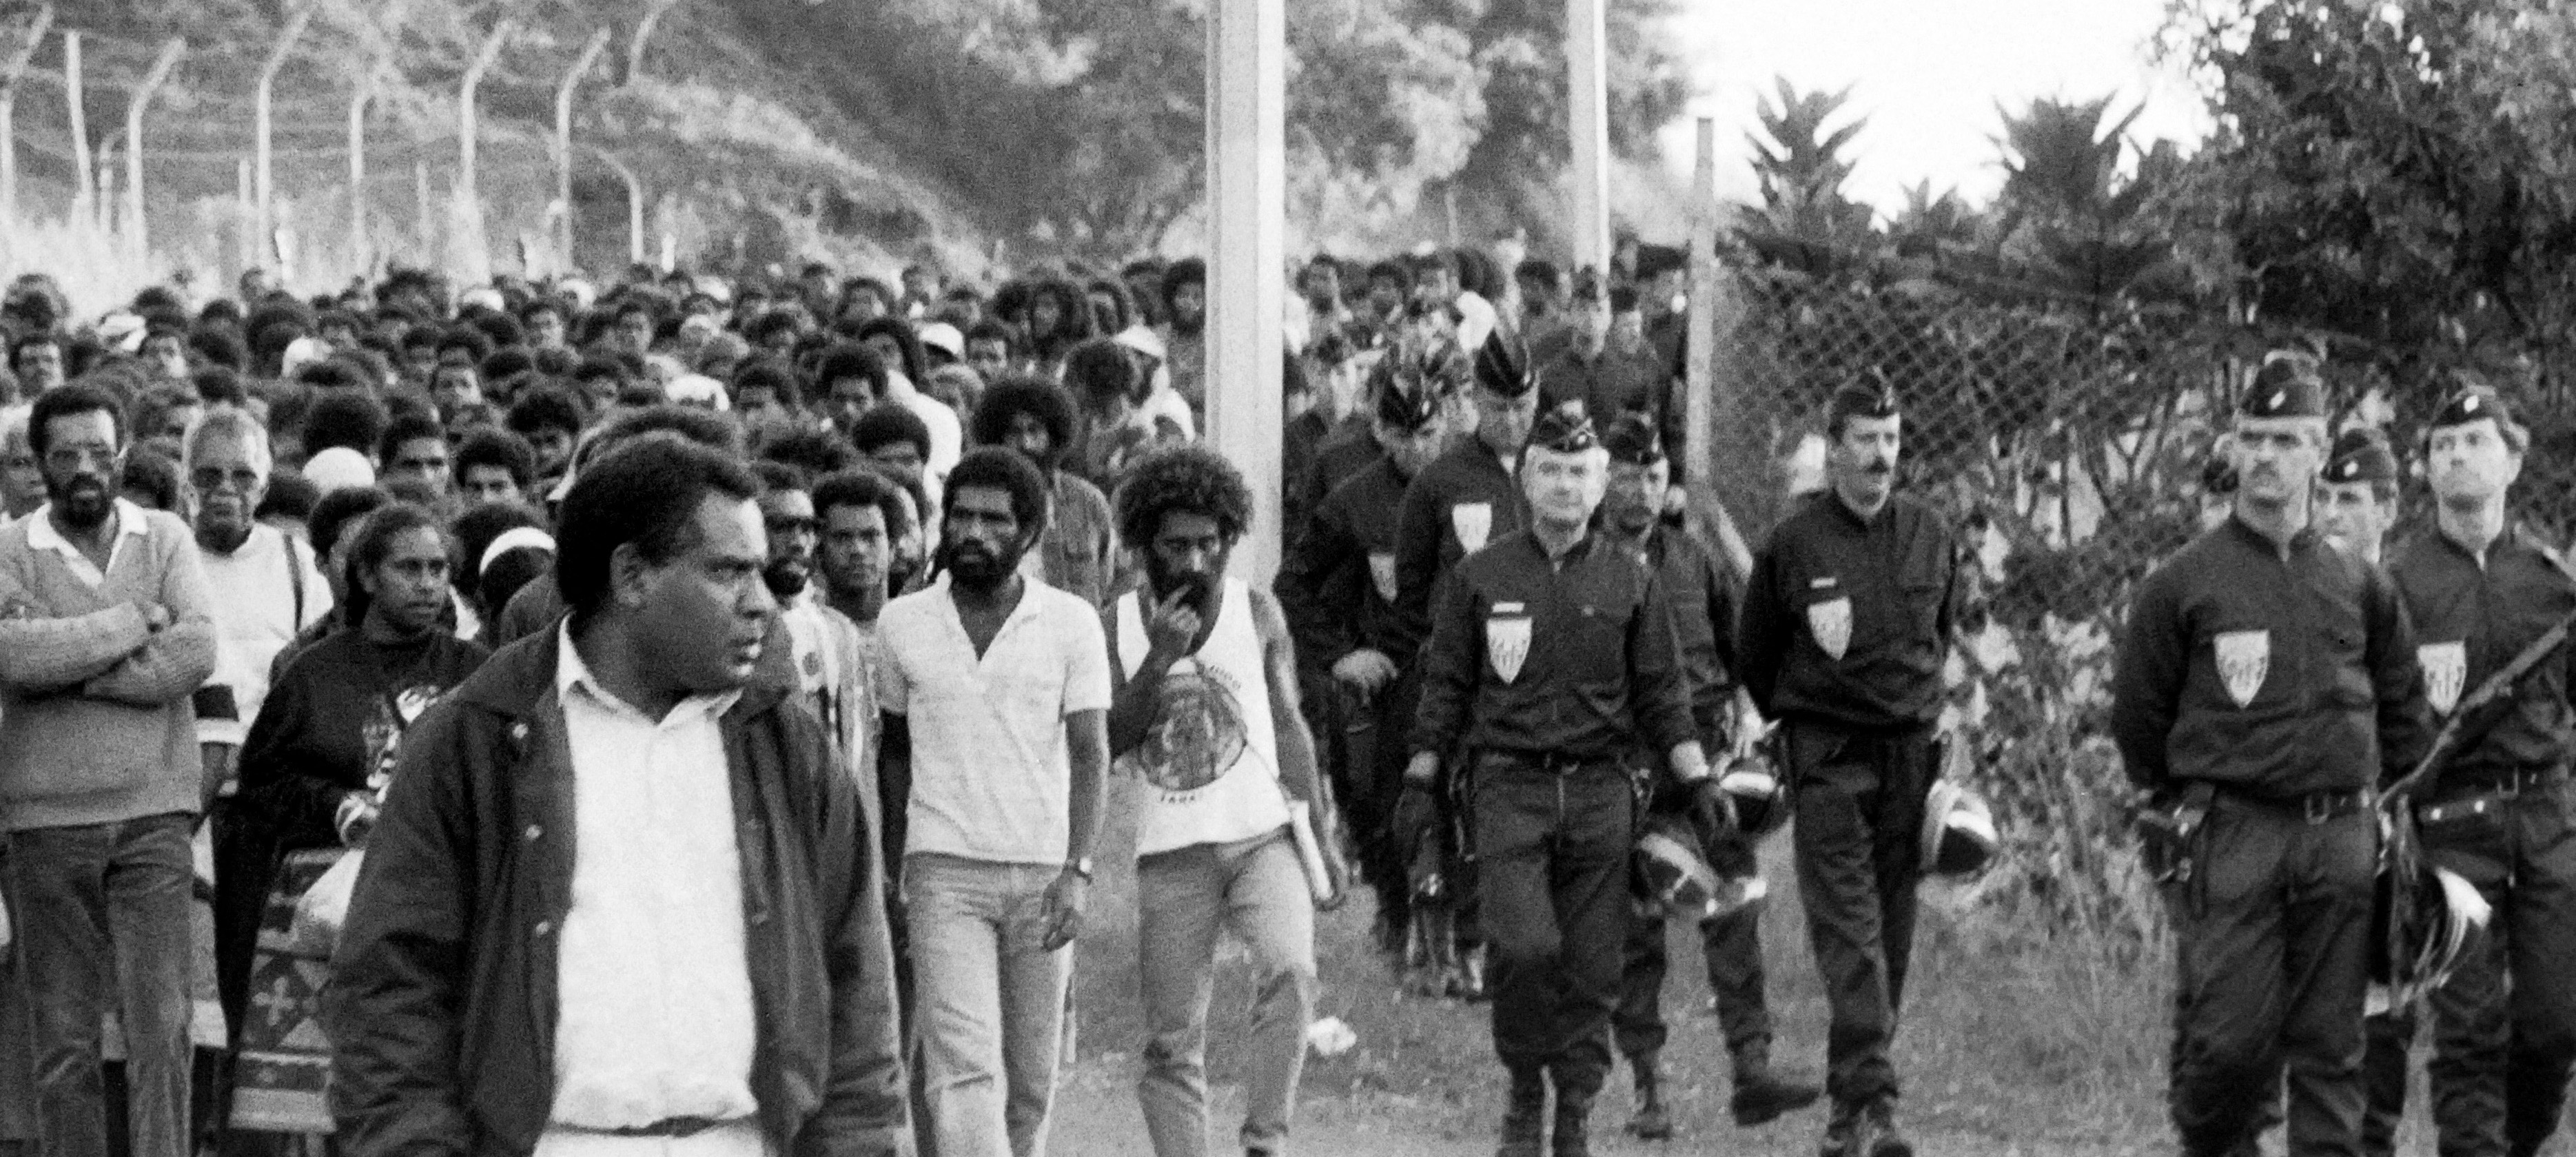 Representative of the New Caledonian separatist Kanak Socialist National Liberation Front (FNLKS), Yeweine Yeweine takes part in a peaceful walk onAugust 26, 1987 in Noumea prior the referendum on independence.